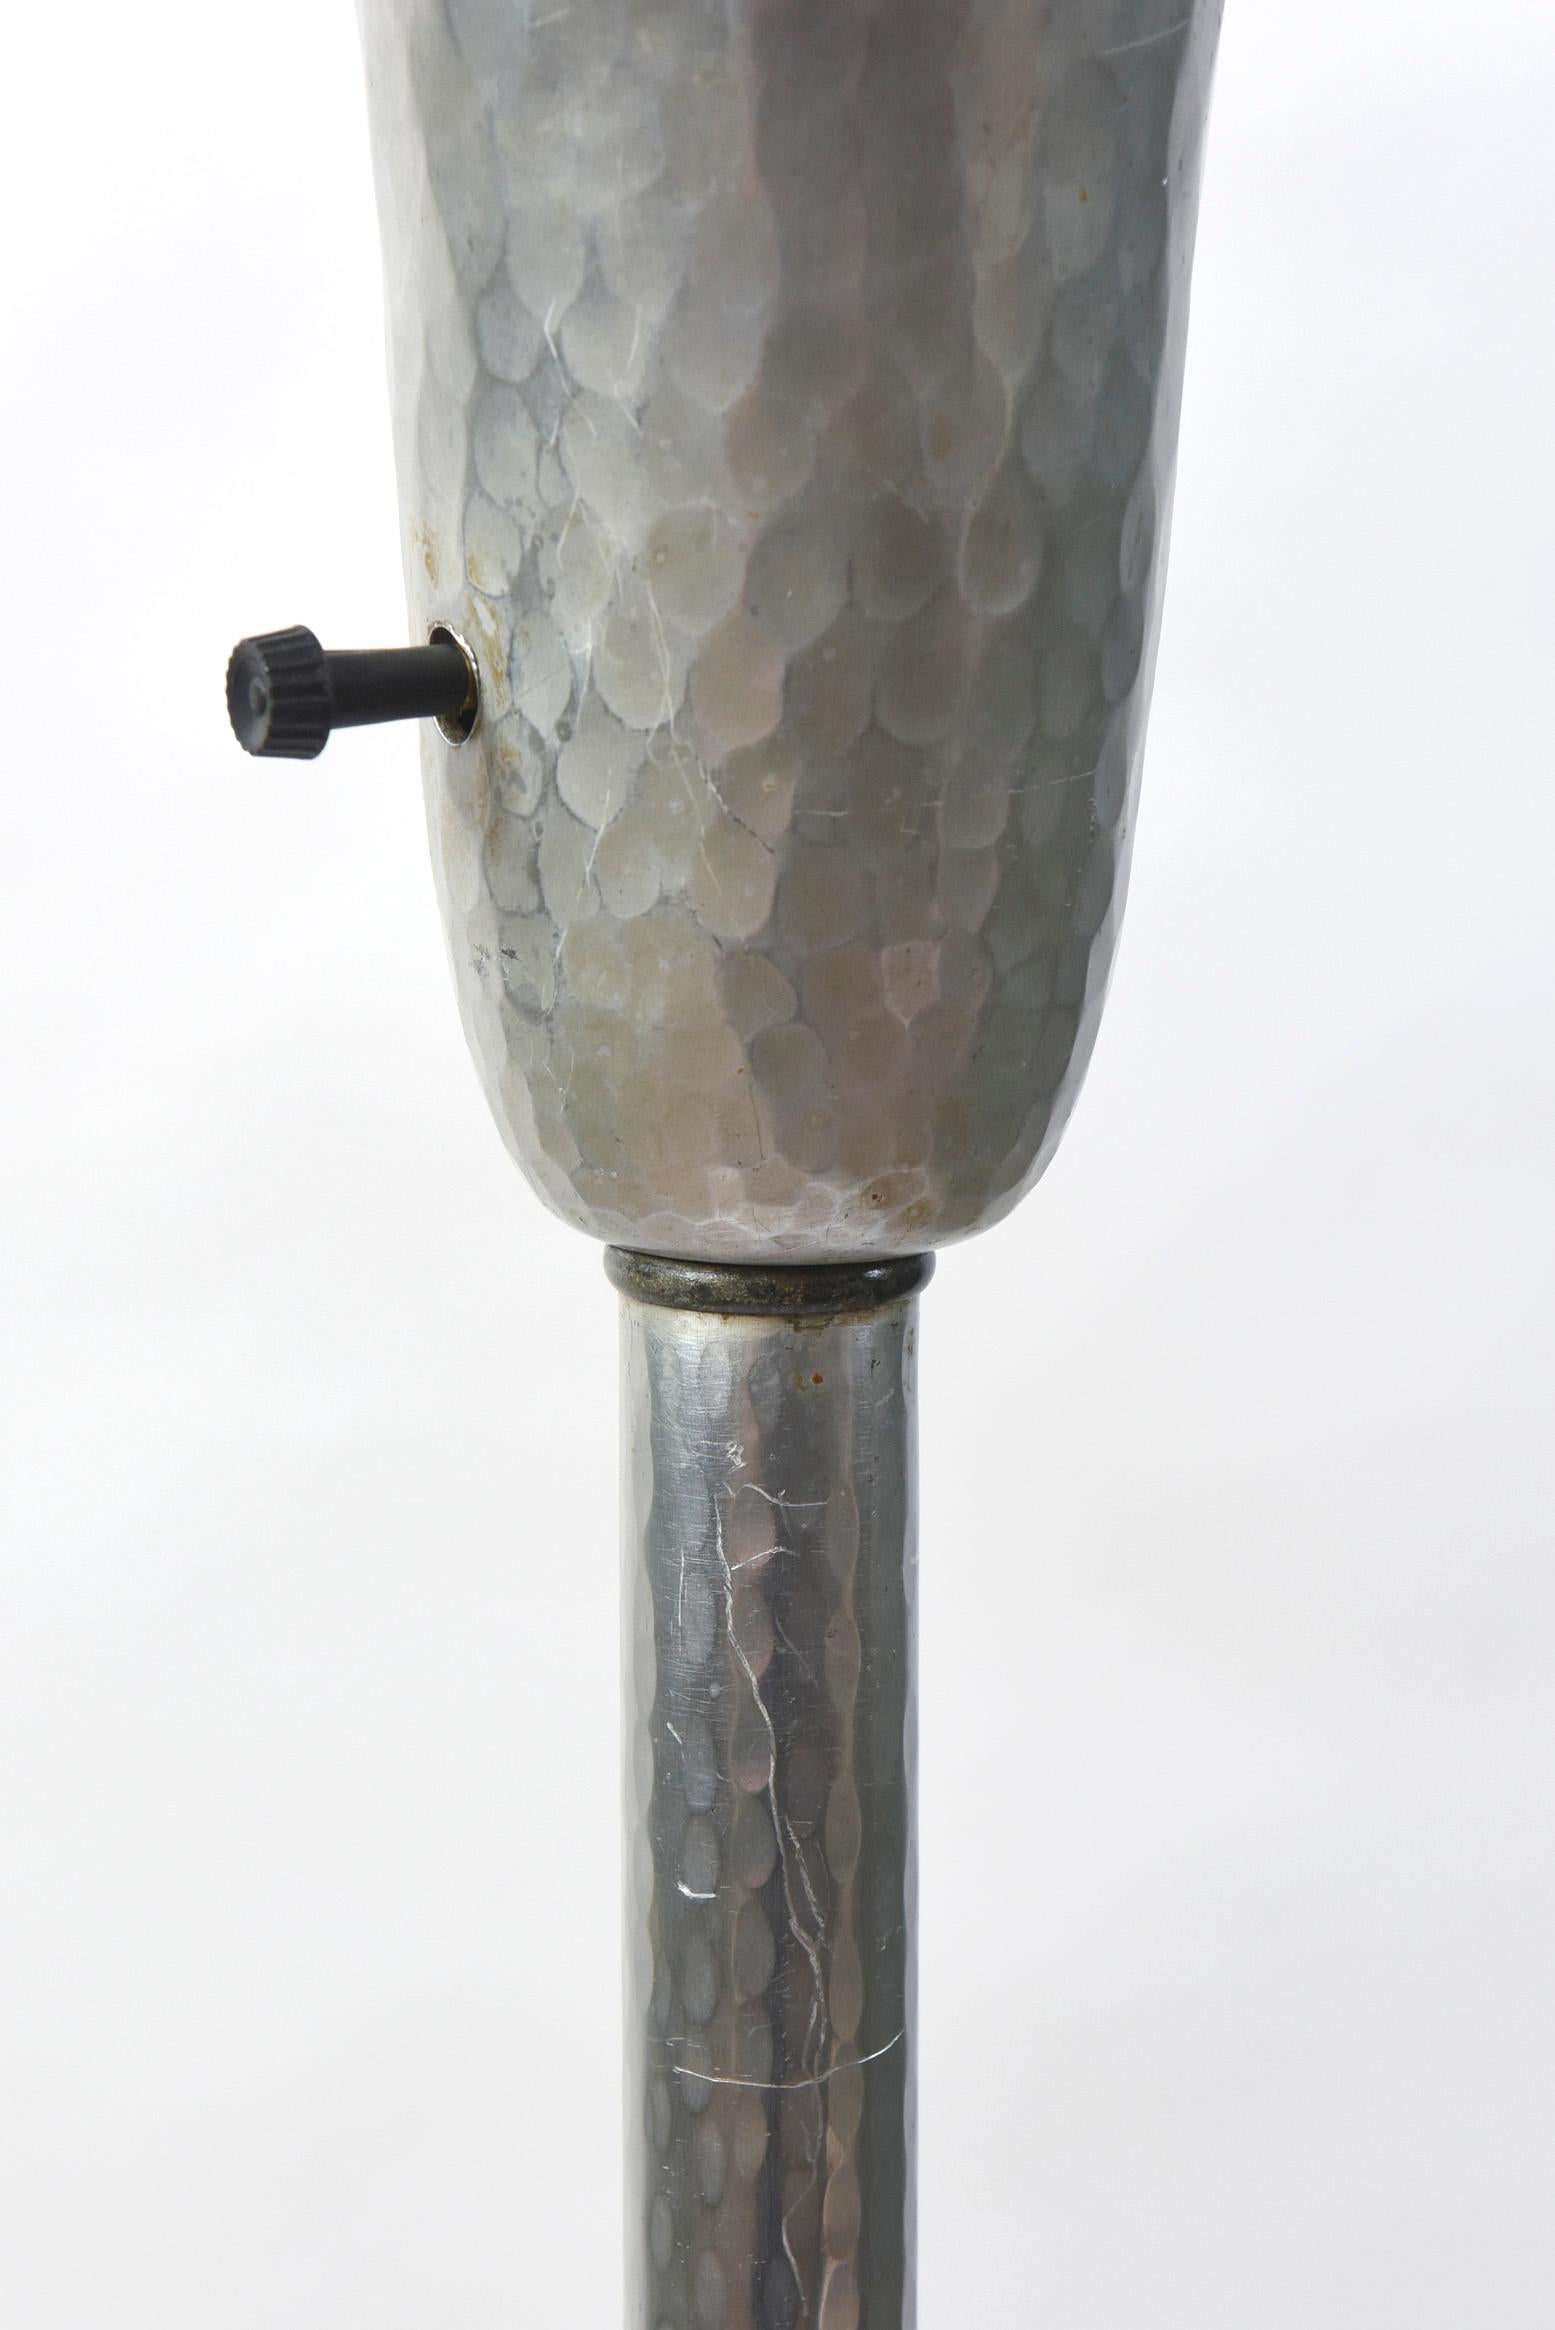 Hammered Aluminum with roses on base. Lovely modern form. Original bent glass shade. C. 1930. Completely rewired and restored.

Dimensions: 
Height: 63
Width (diameter): 18